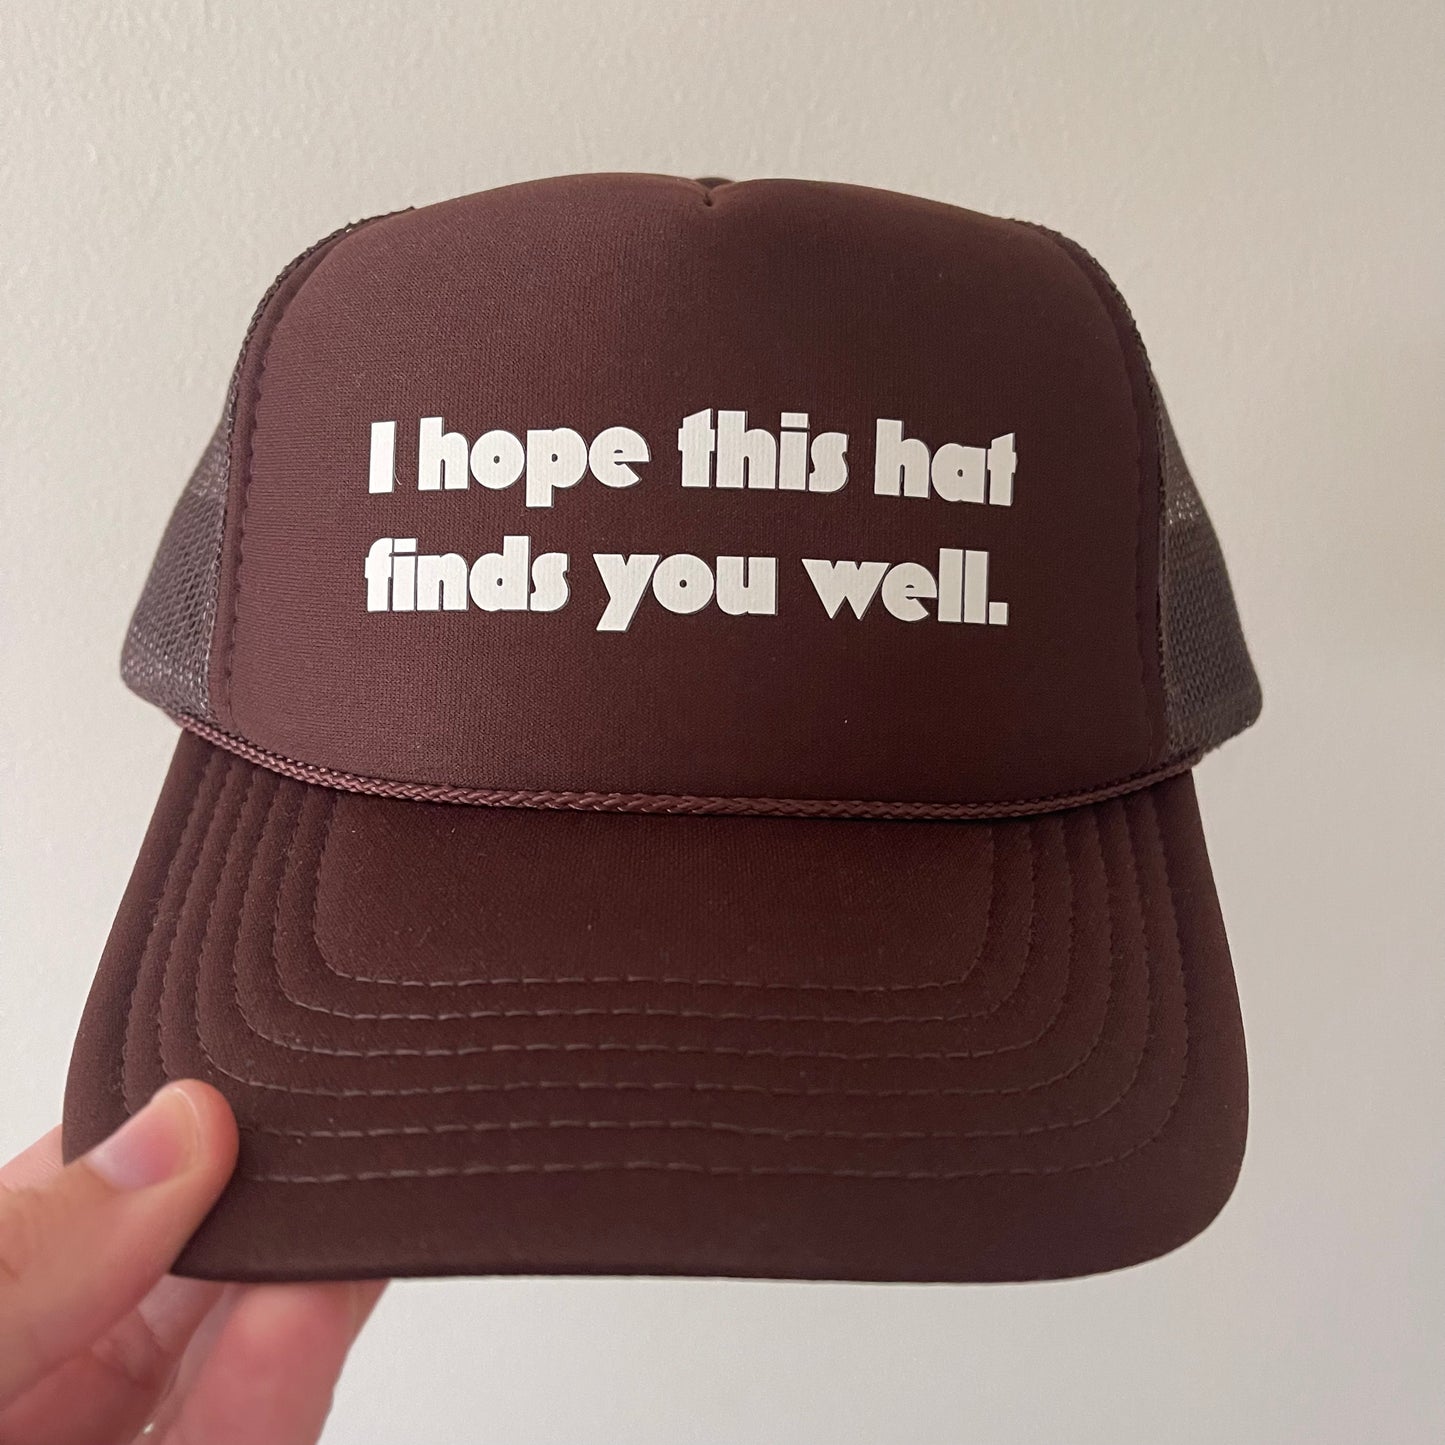 I hope this hat finds you well.